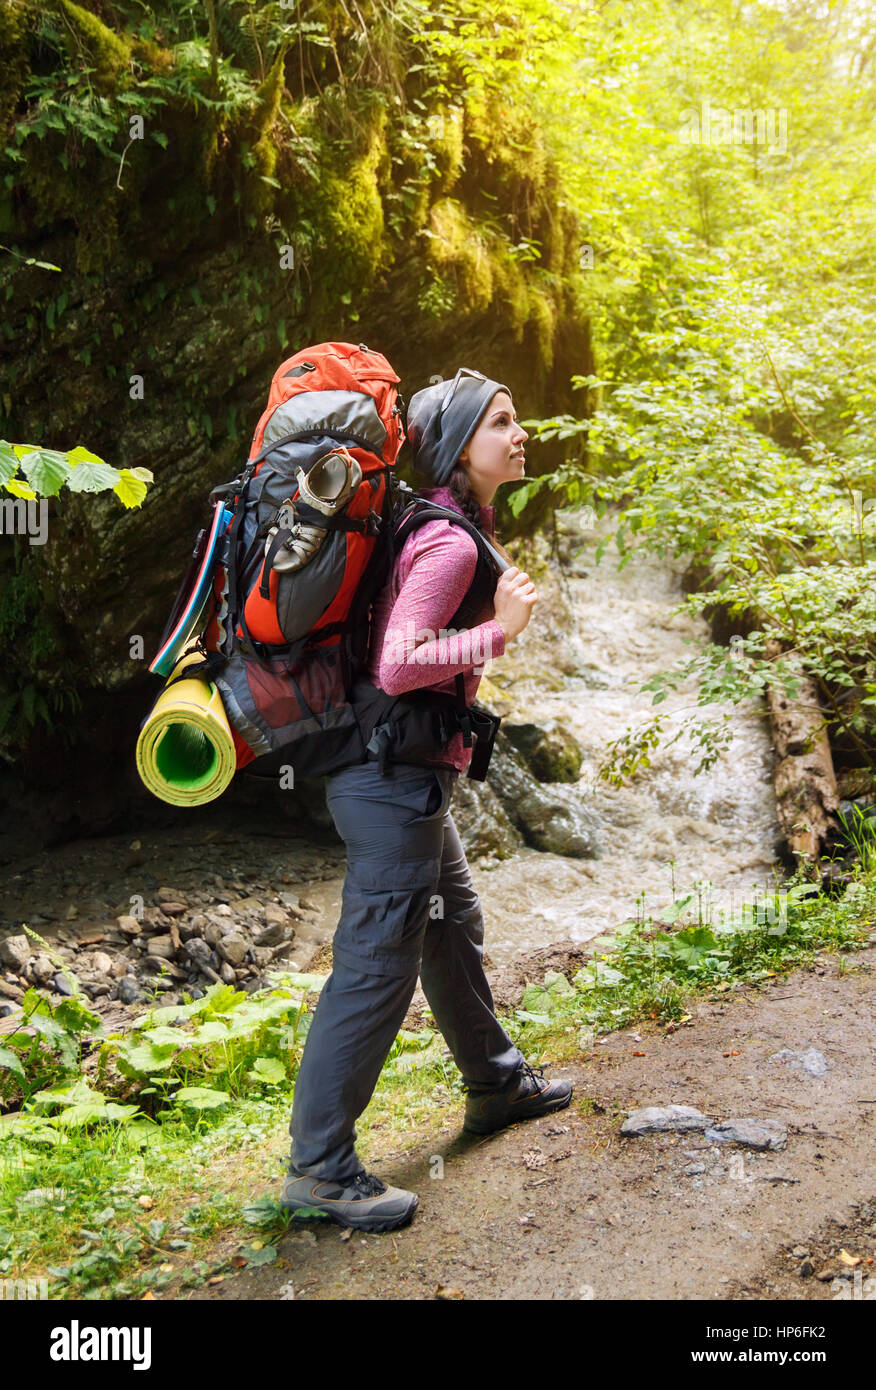 https://c8.alamy.com/comp/HP6FK2/woman-hiker-trekking-on-trail-in-mountains-river-and-rock-with-moss-HP6FK2.jpg